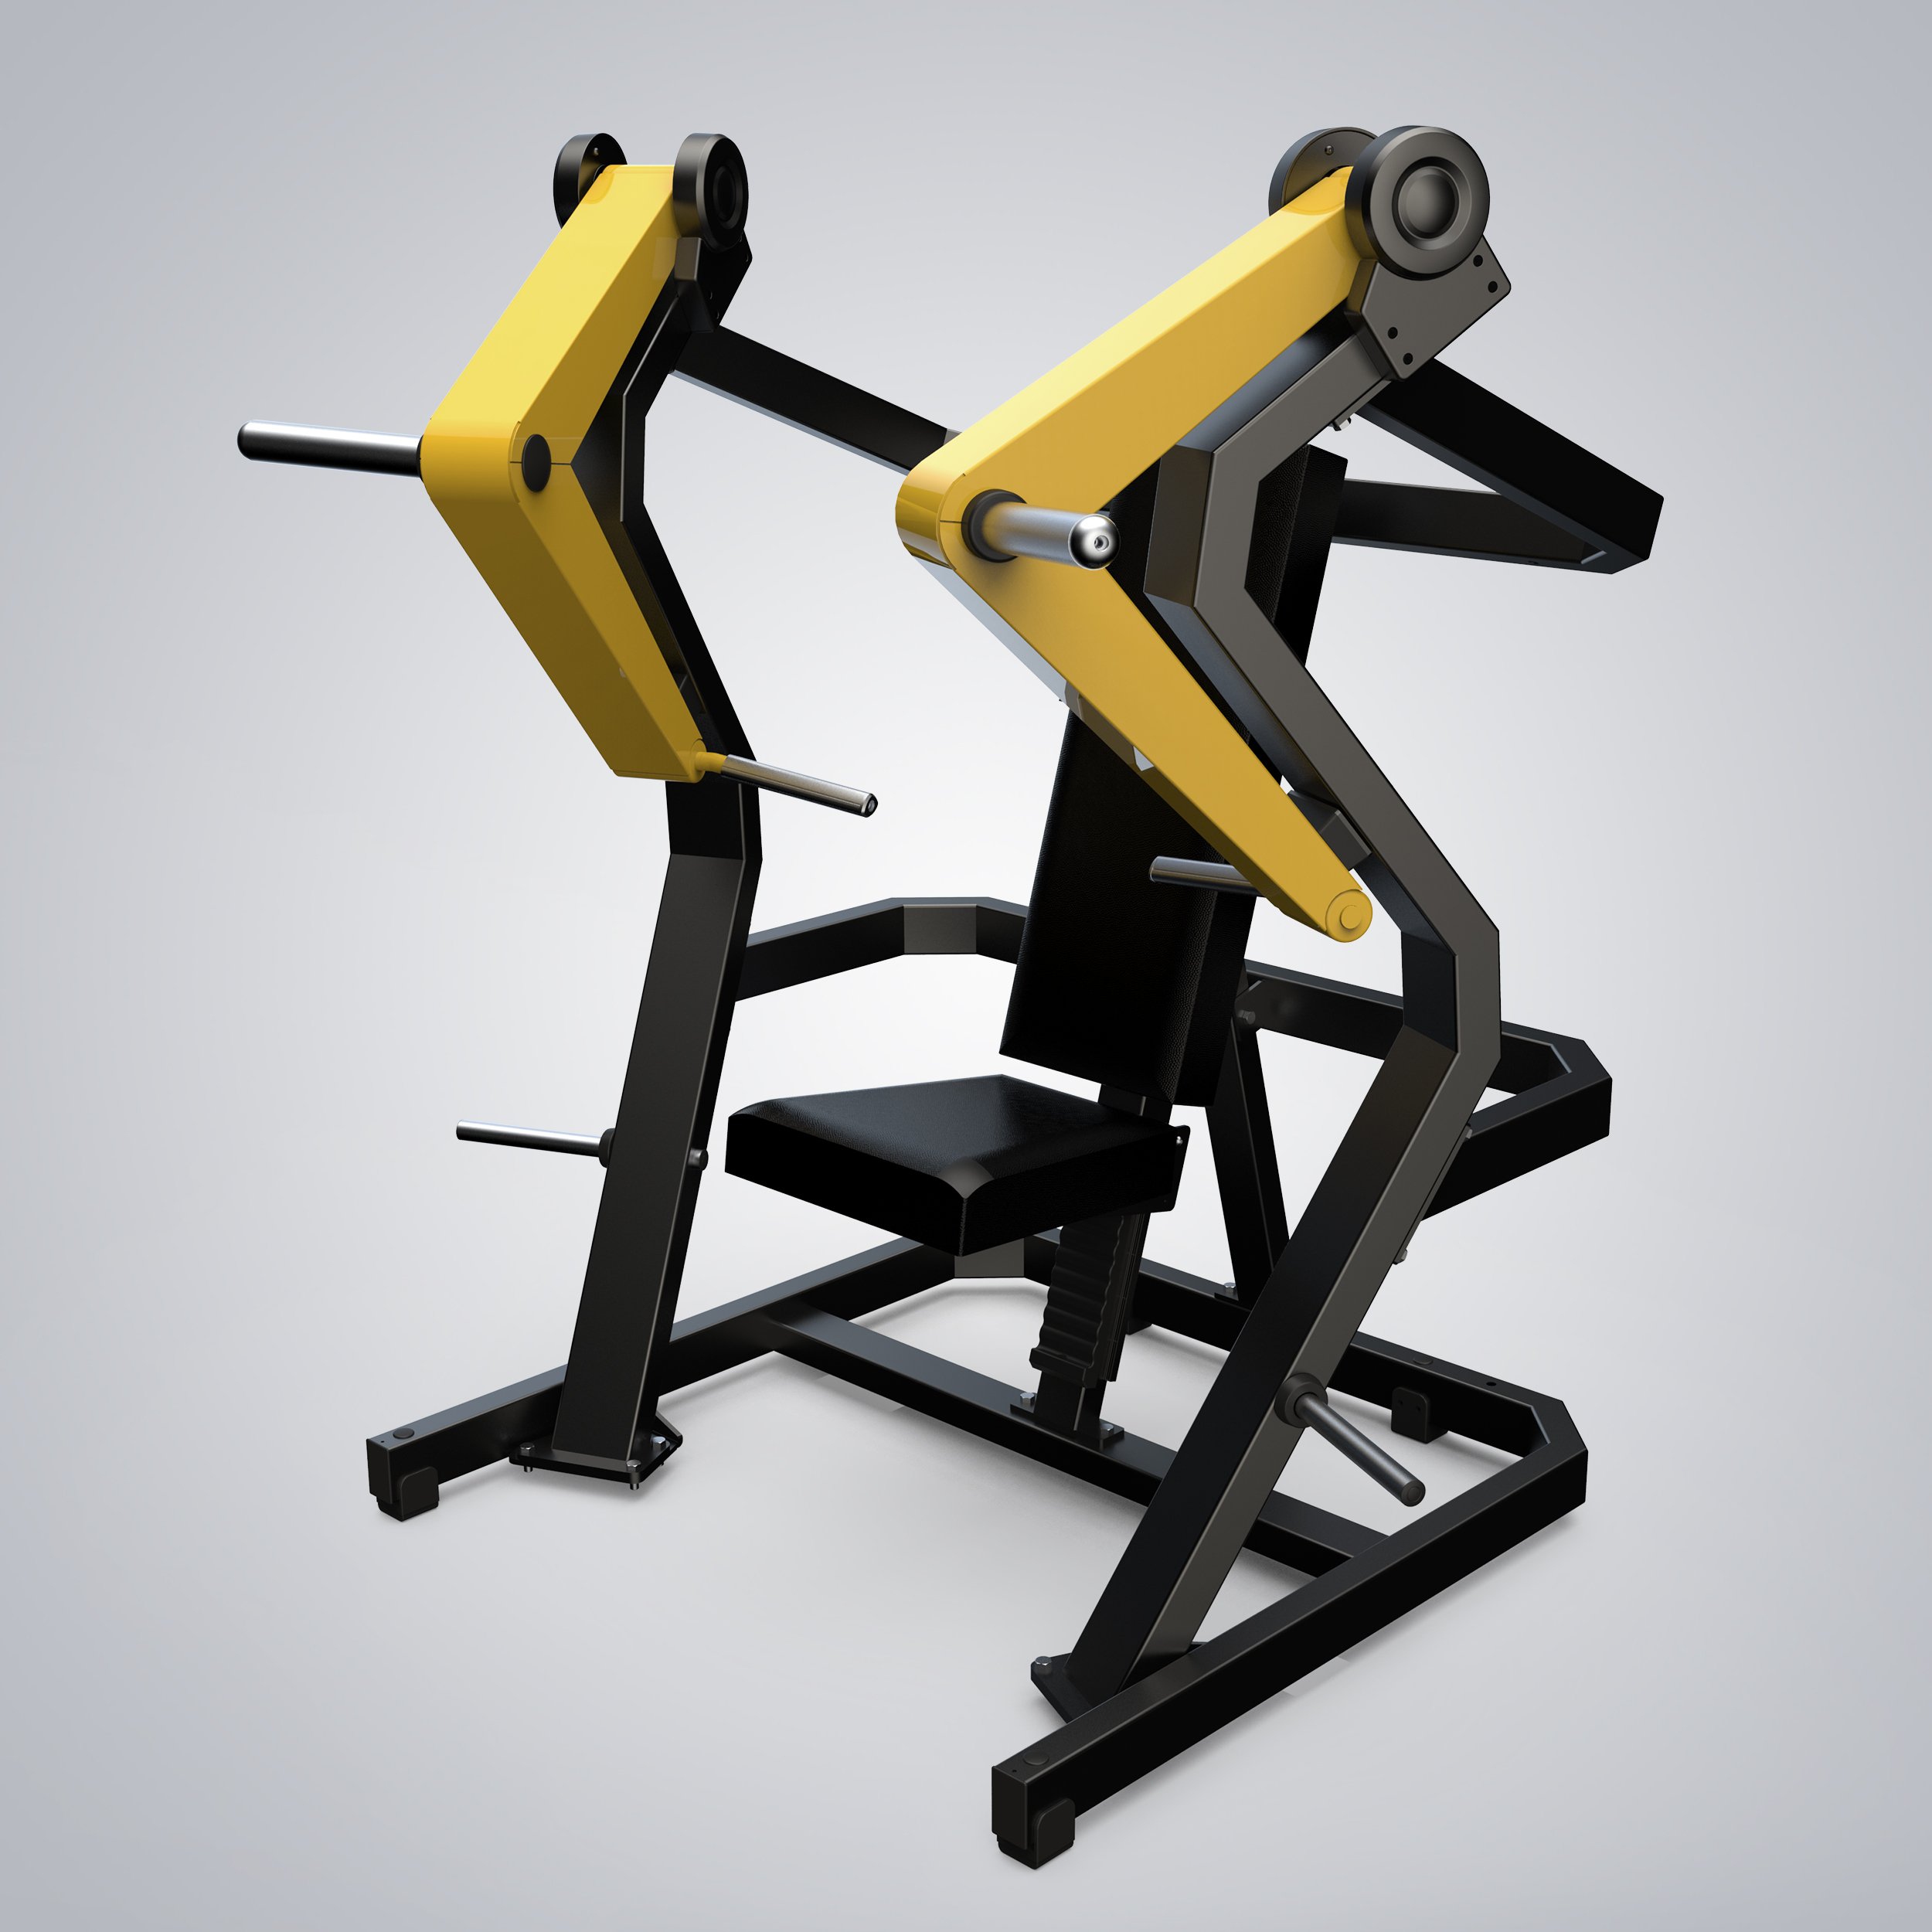 Wholesale Chest Press Manufacturer and Supplier, Factory Pricelist